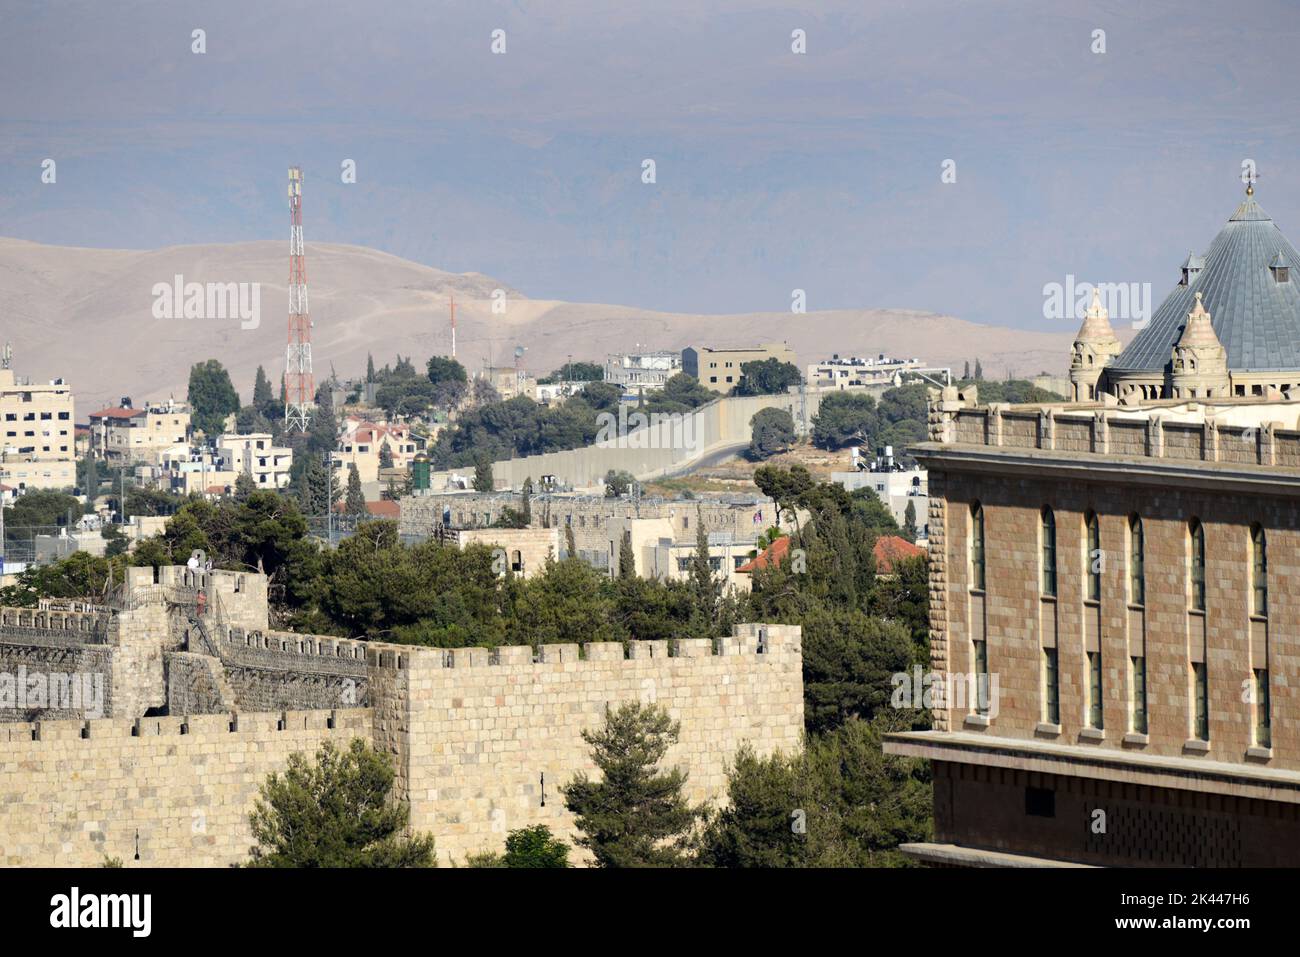 A view of the old city in Jerusalem with the Judean desert and Jordanian mountains in the background. Stock Photo